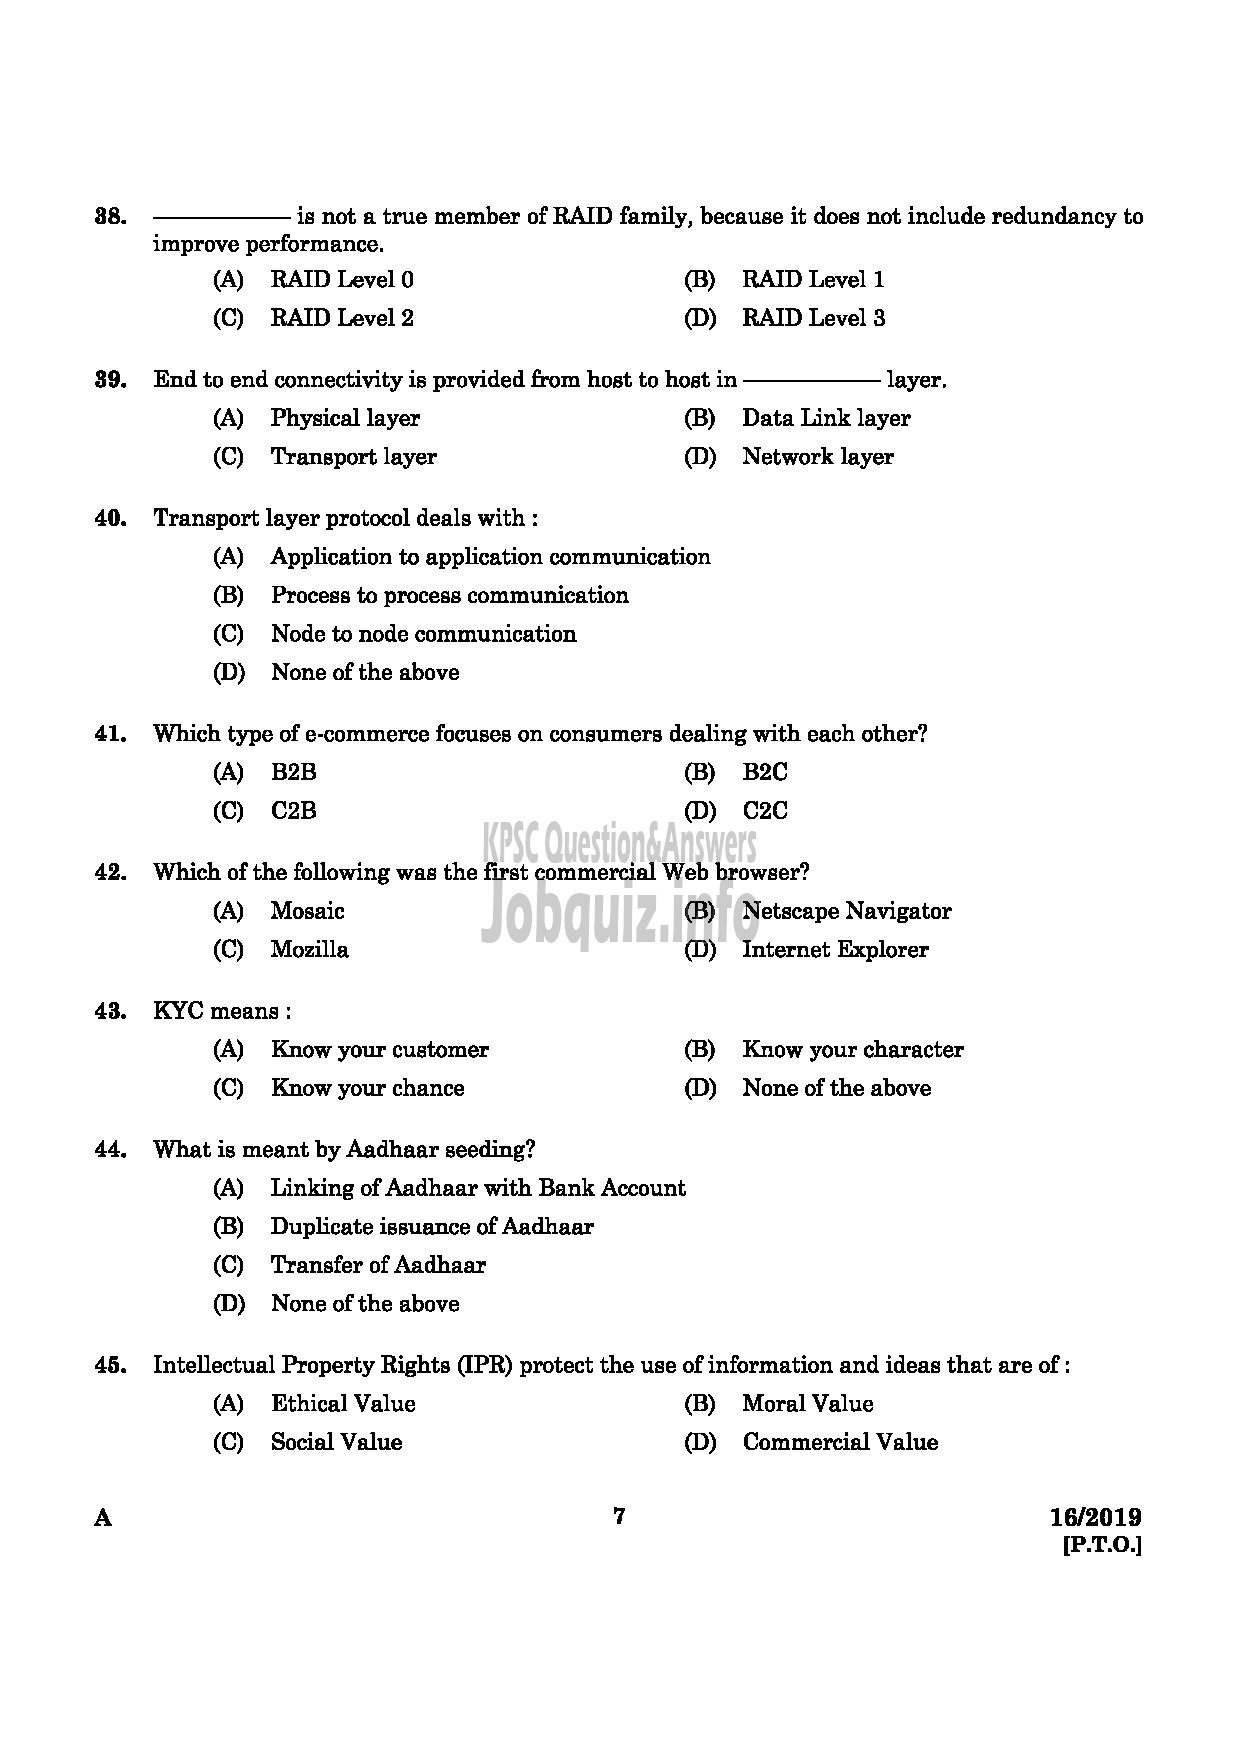 Kerala PSC Question Paper - JUNIOR INSTRUCTOR SOFTWARE TESTING ASSISTANT INDUSTRIAL TRAINING -5